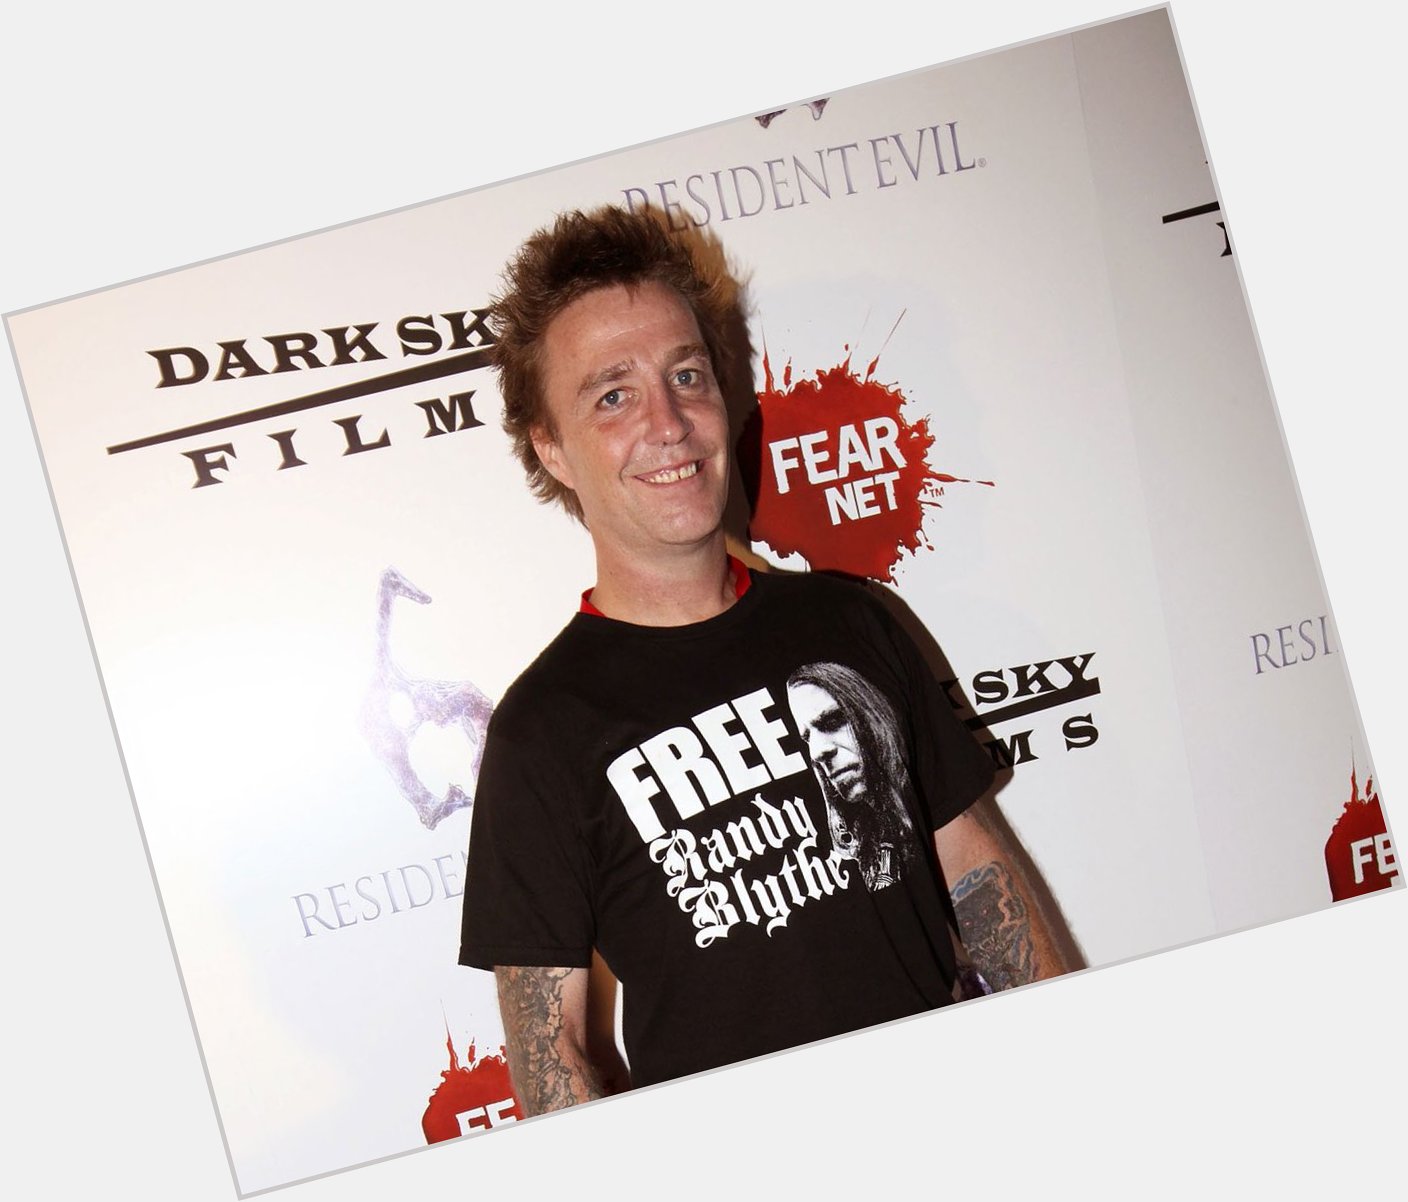 Happy birthday to the man Dave Brockie. We miss you RIP 